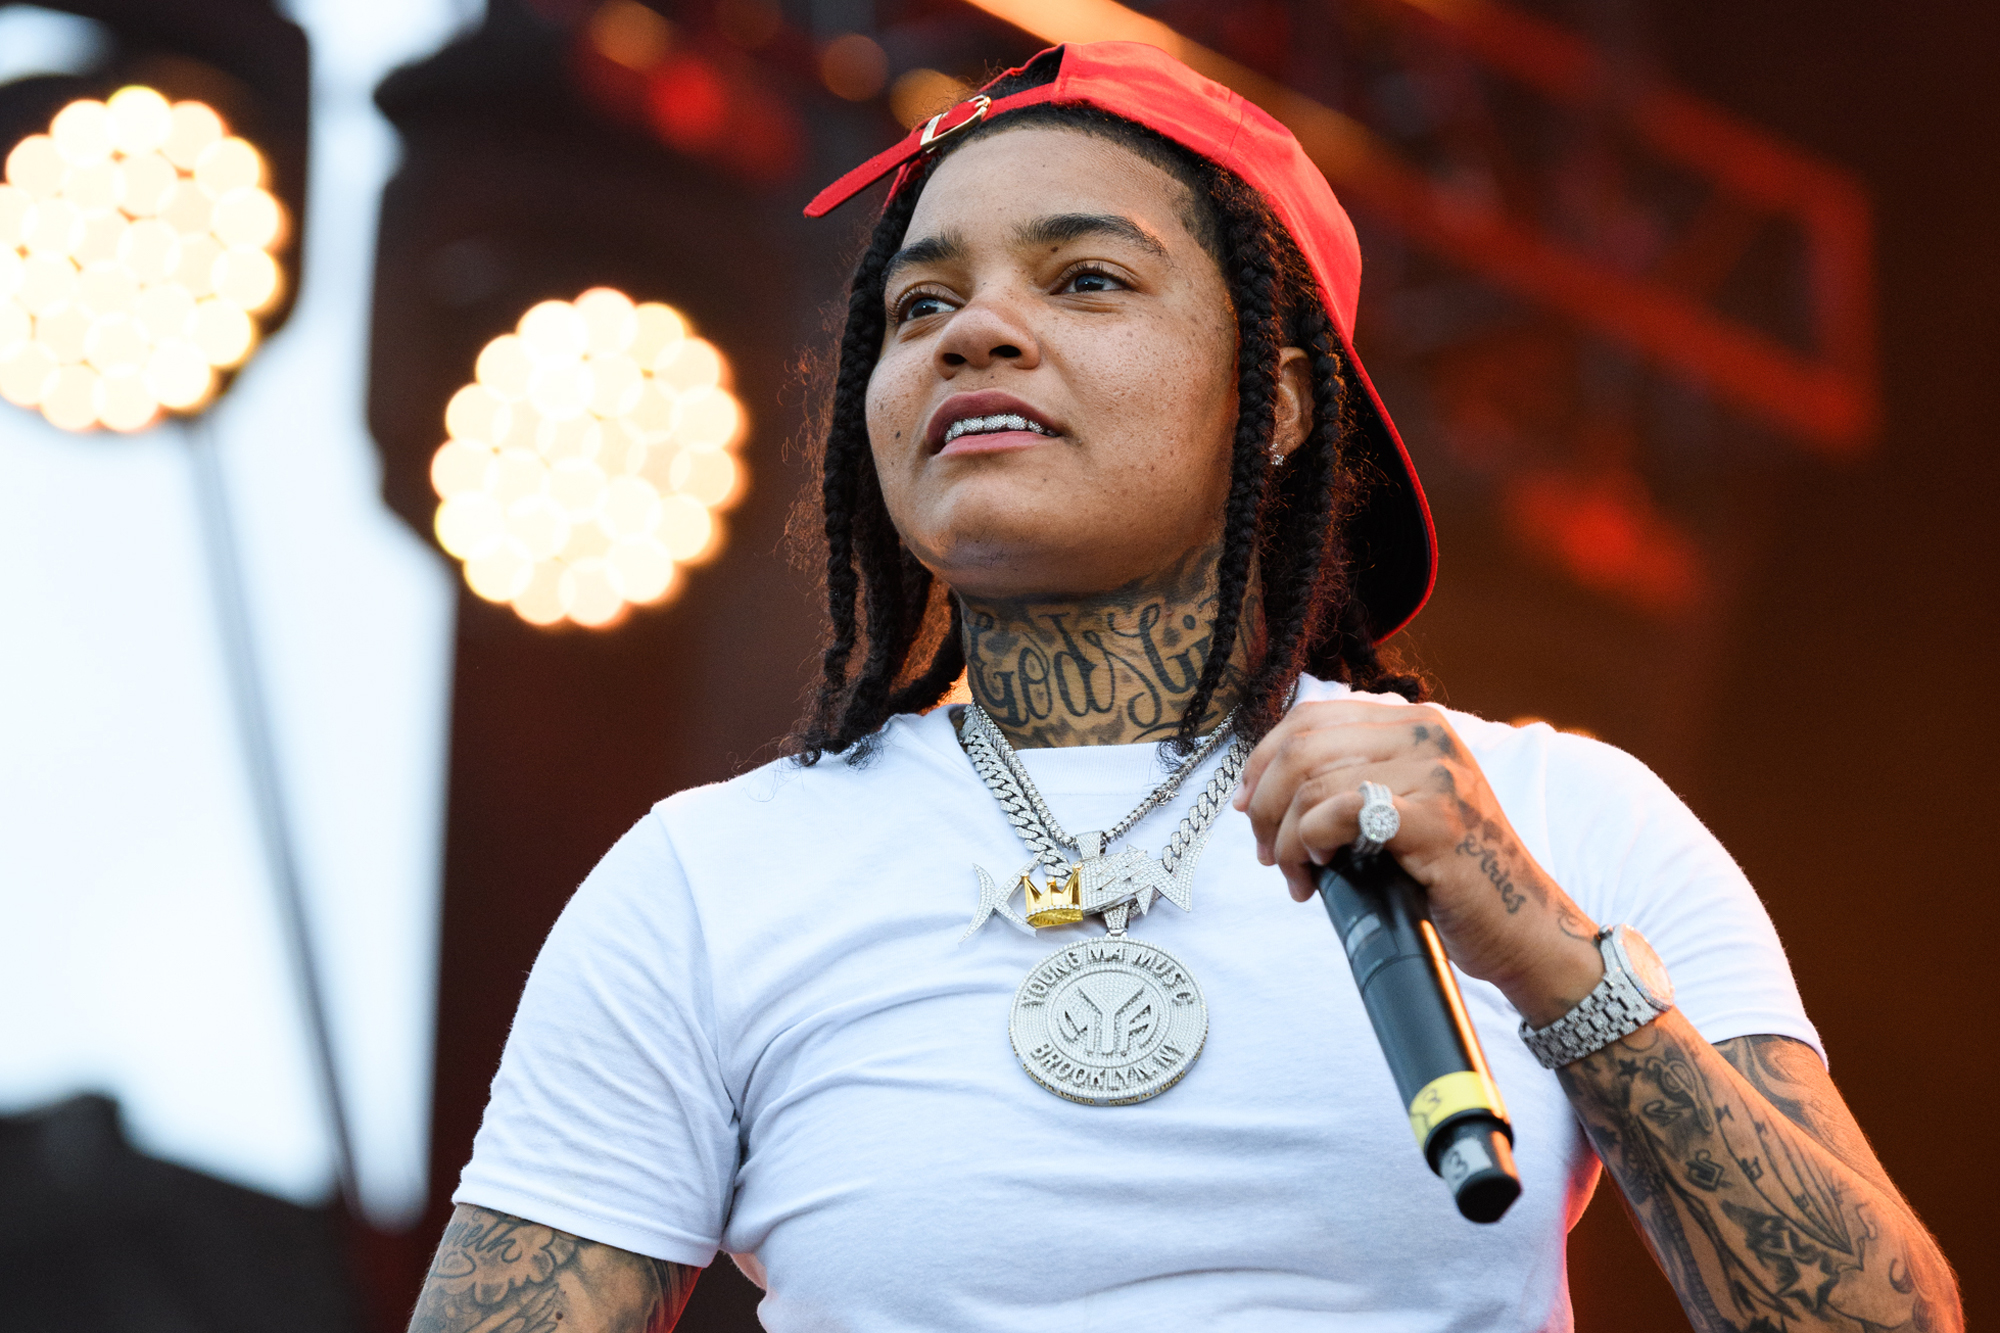 AFTER TWITTER HAS A FIELD DAY, YOUNG M.A EXPLAINS HER PREGNANCY SITUATION.